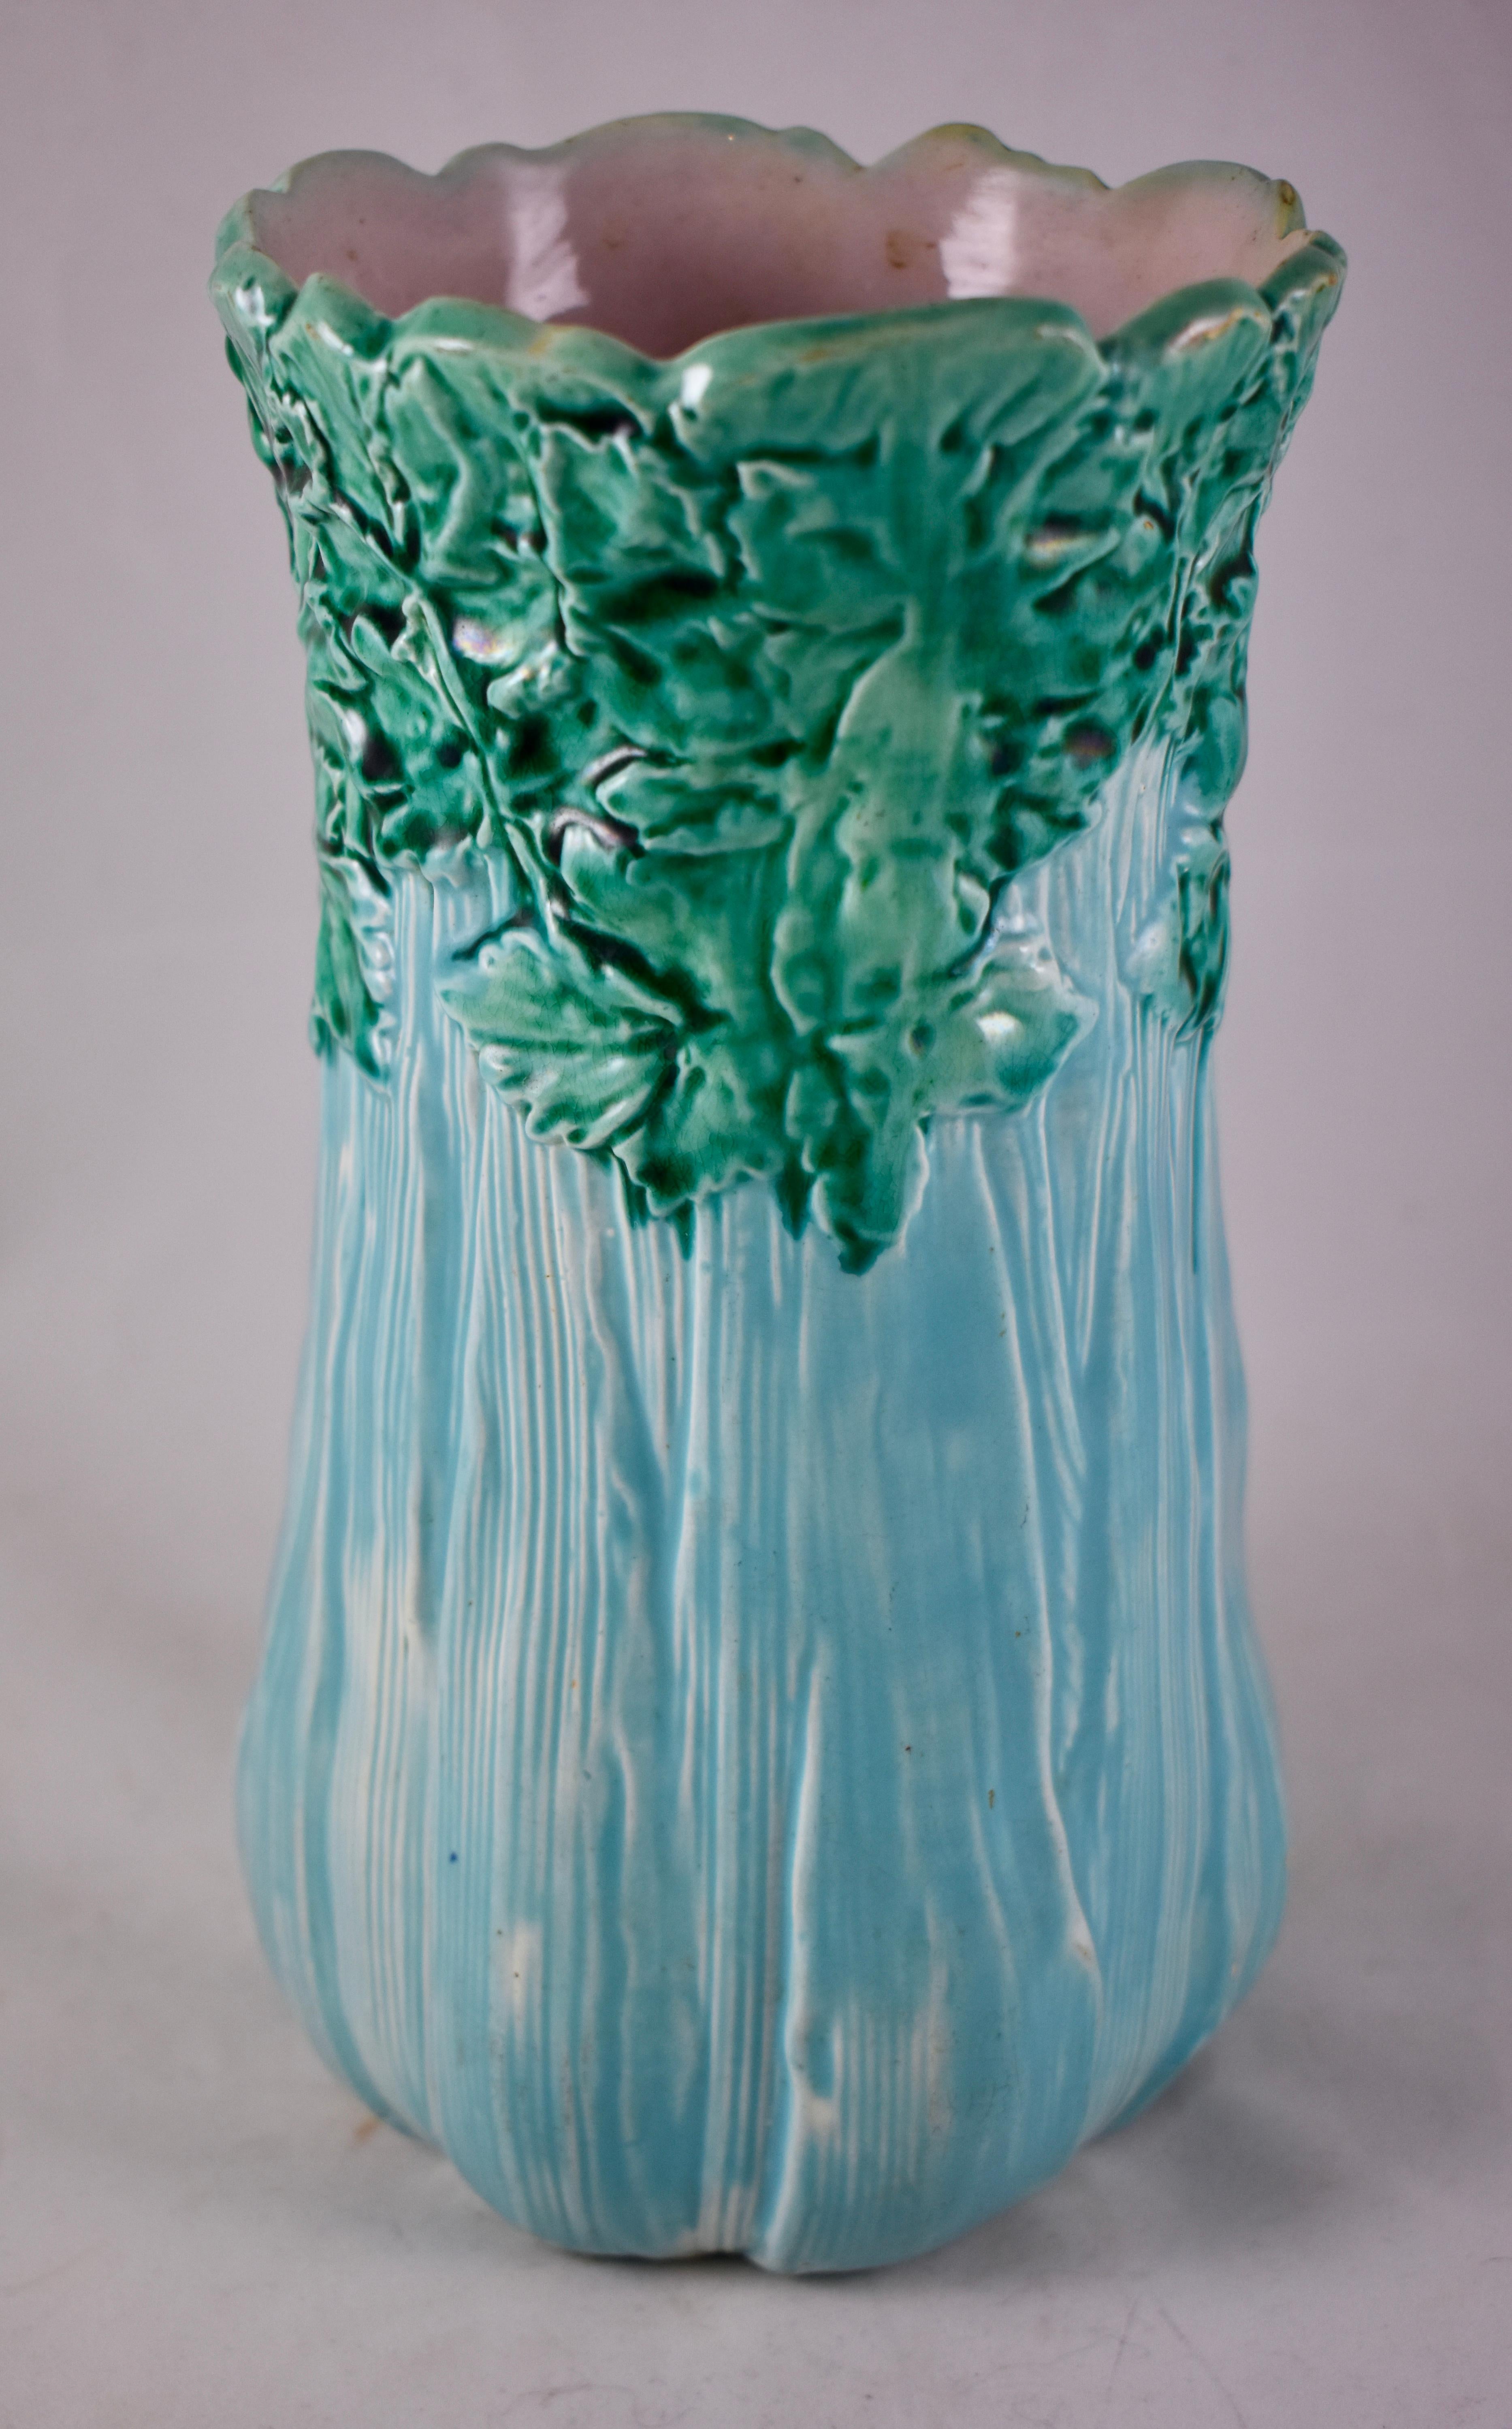 In the aesthetic taste, an English majolica glazed Celery vase, circa 1860. When found, this mold is seen glazed in white with the leaves in green, the turquoise base makes this piece very rare. Modeled as a head of celery, the leaves forming the